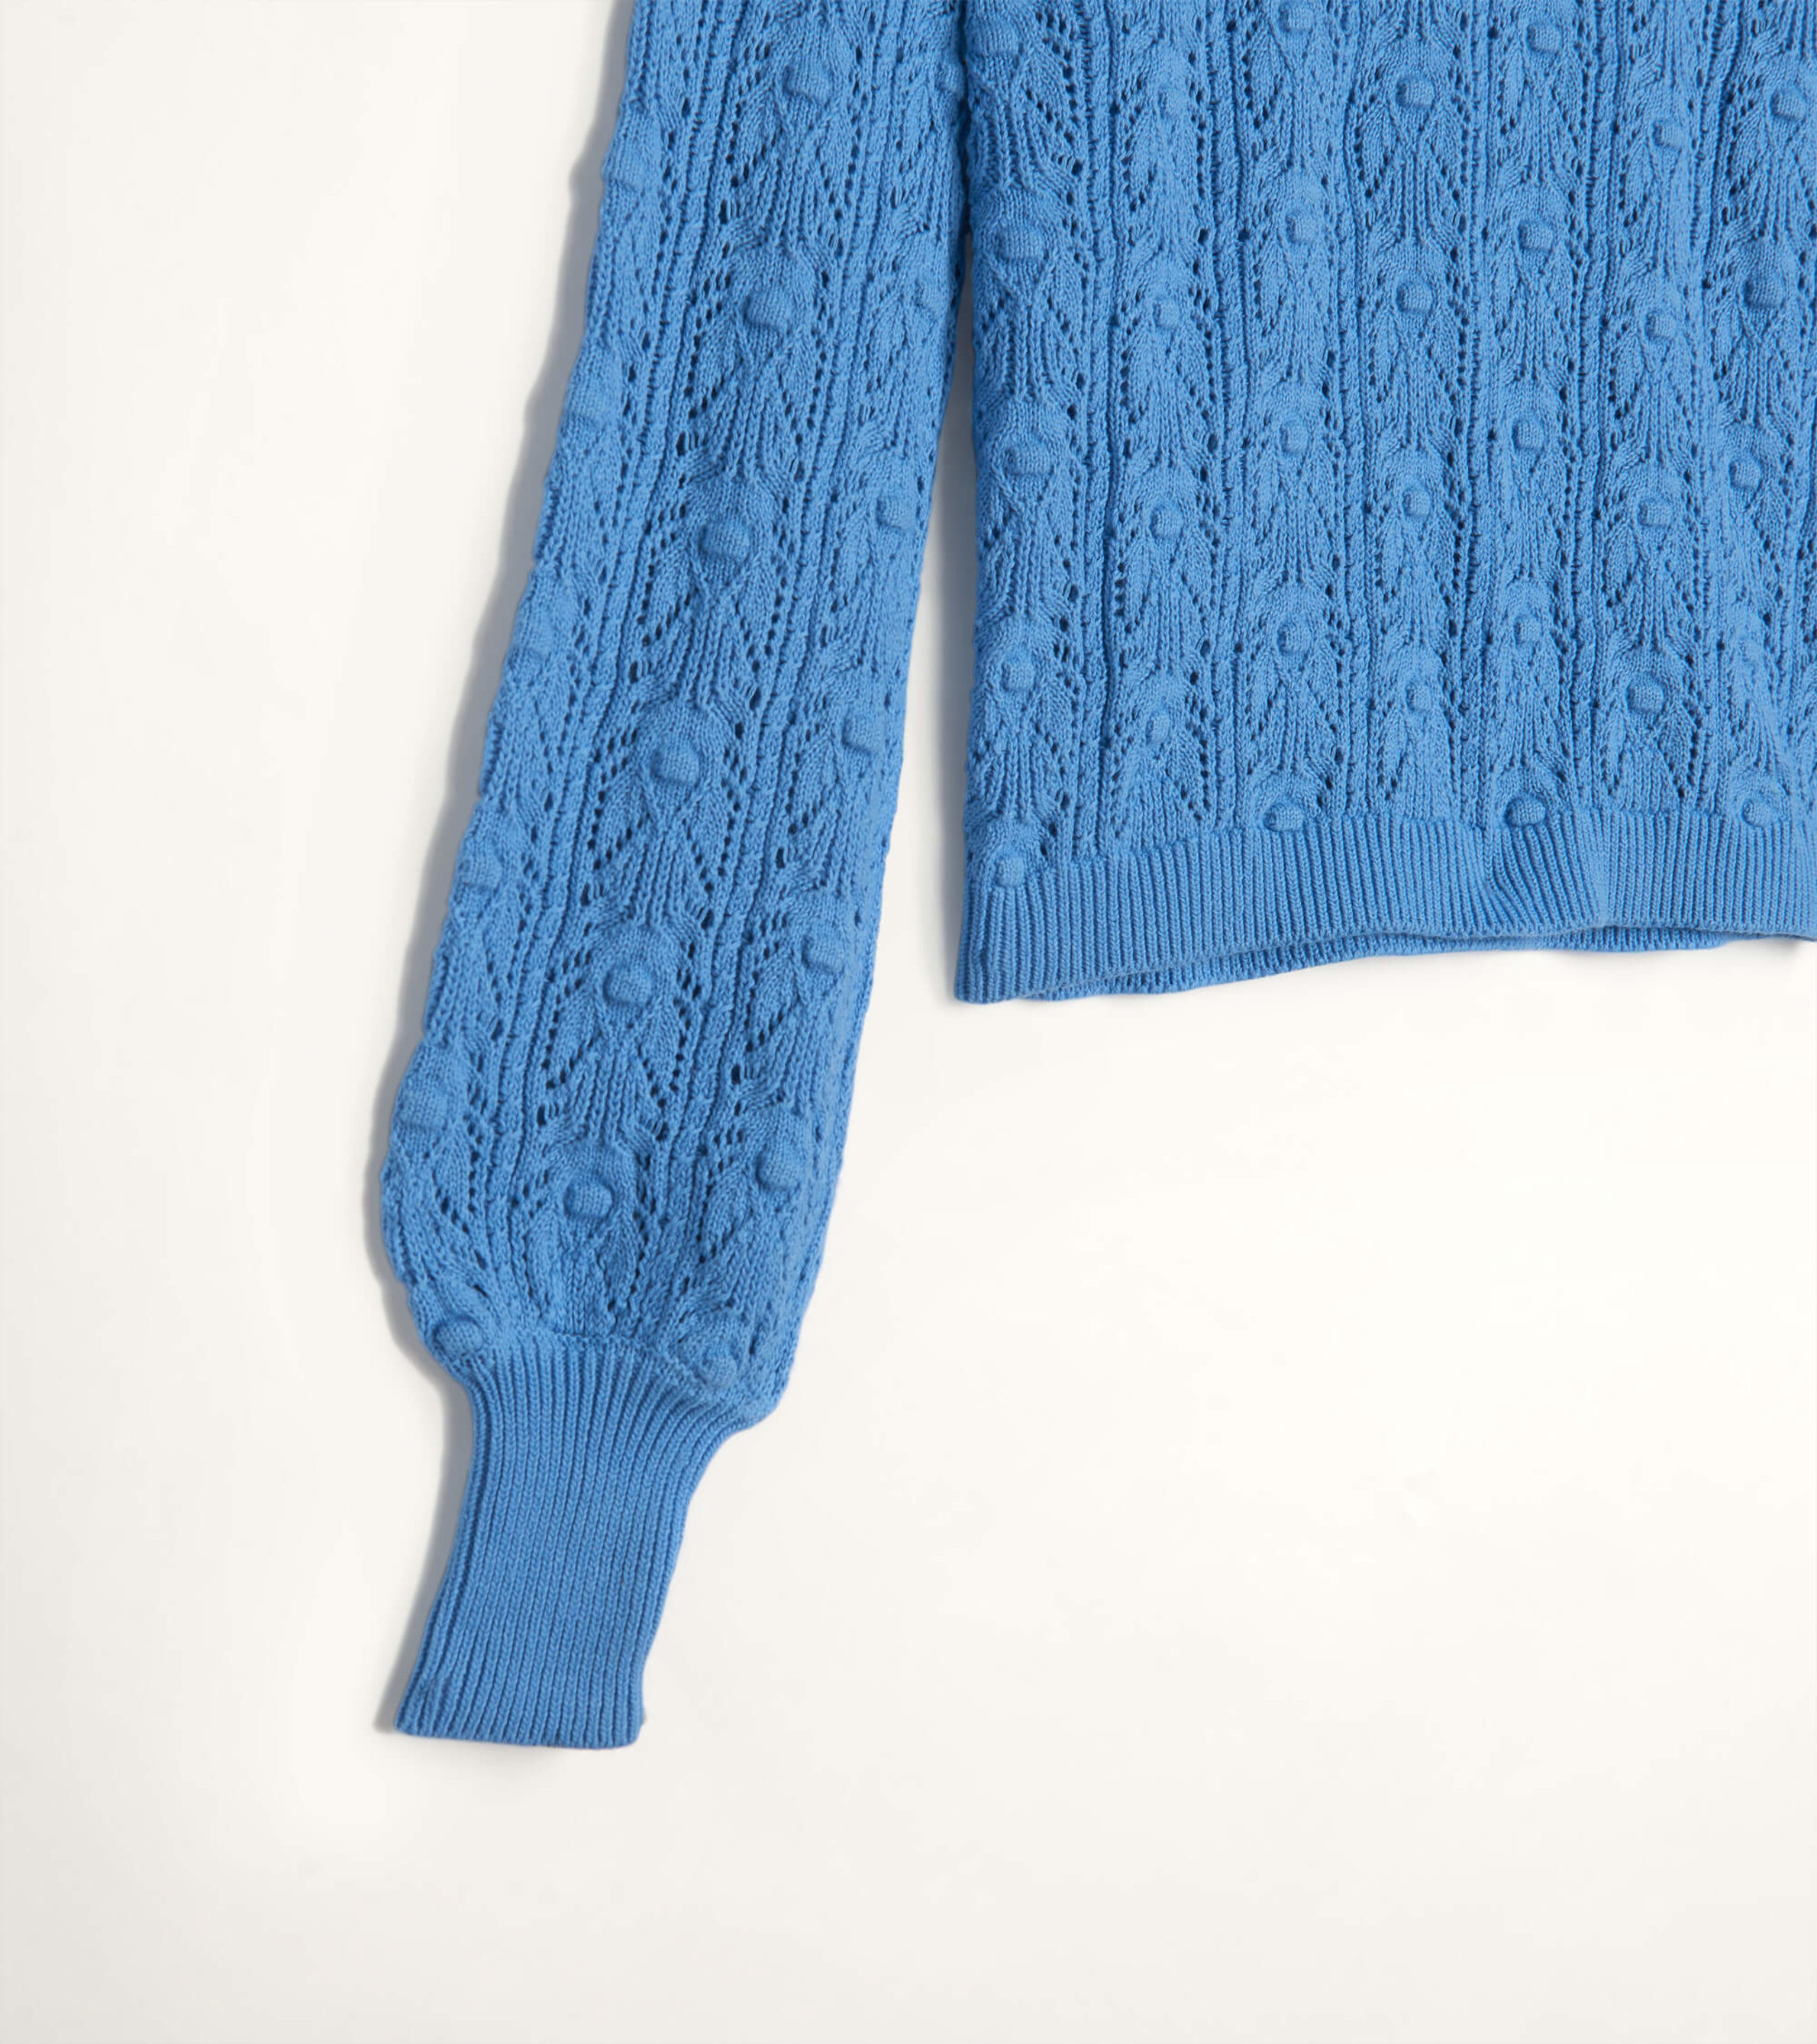 V-Neck Pointelle Knit Sweater in Dusty Blue - Retro, Indie and